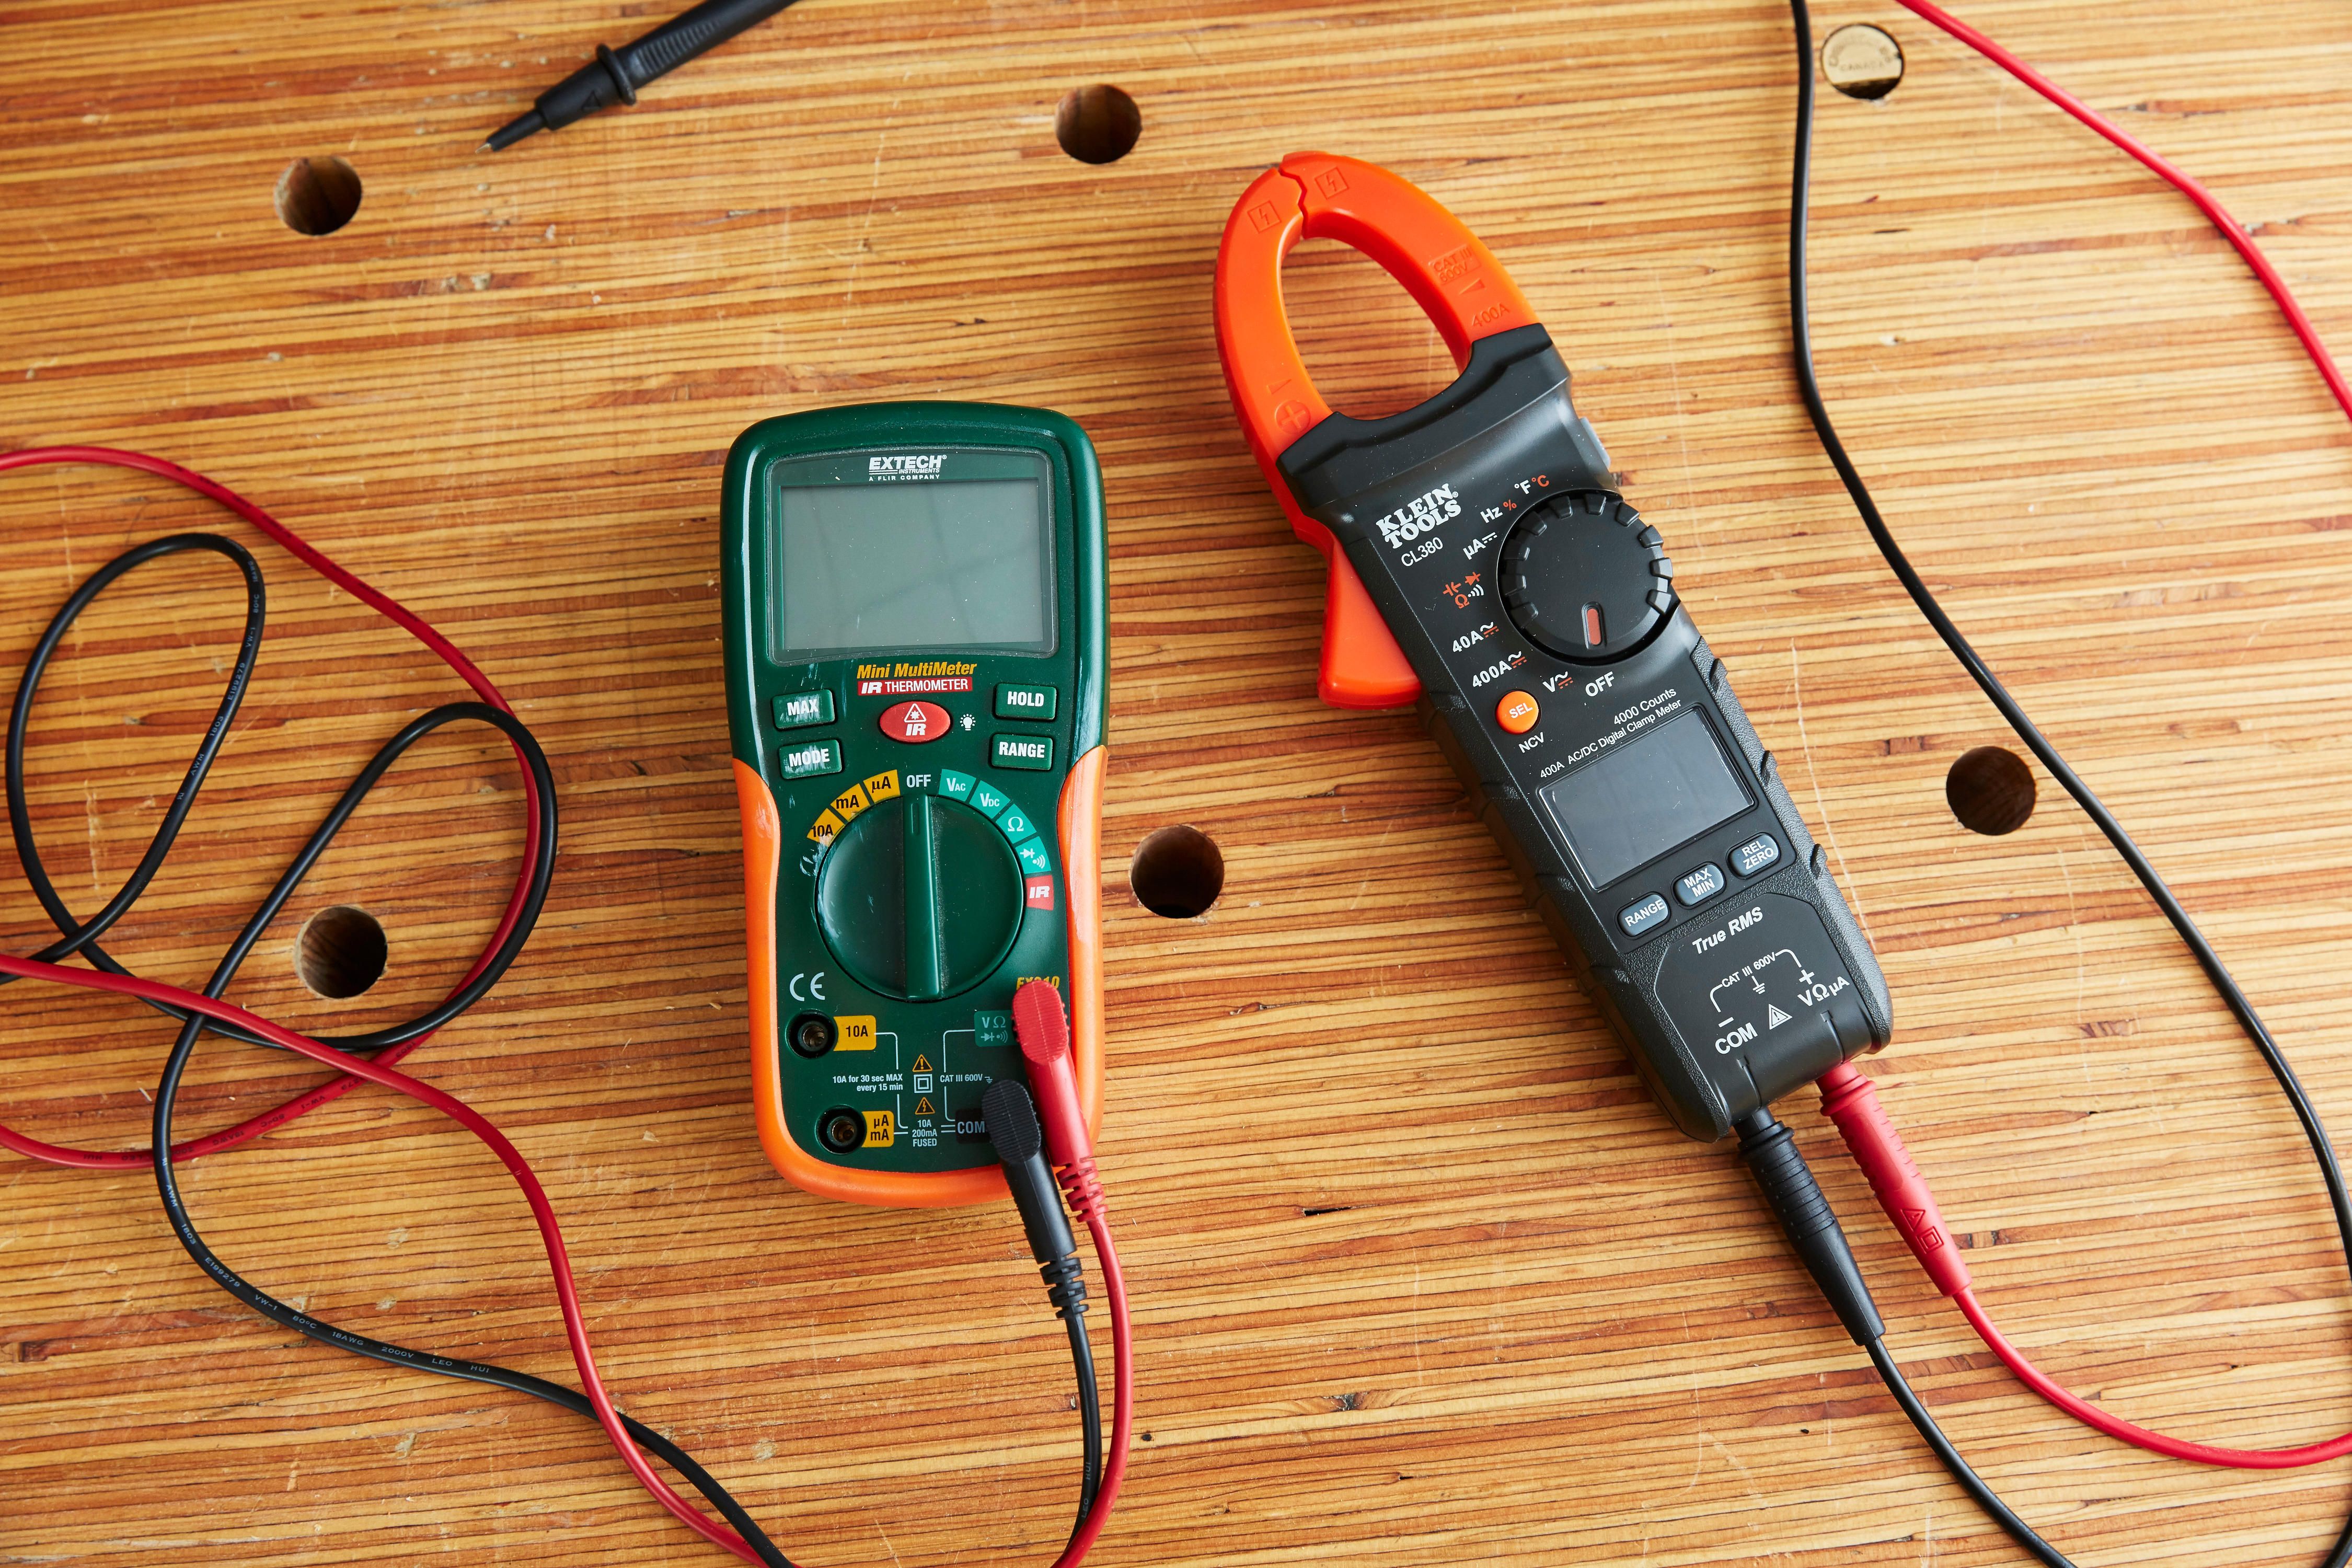 How To Use A Digital Multimeter What, How To Test Home Wiring With Multimeter